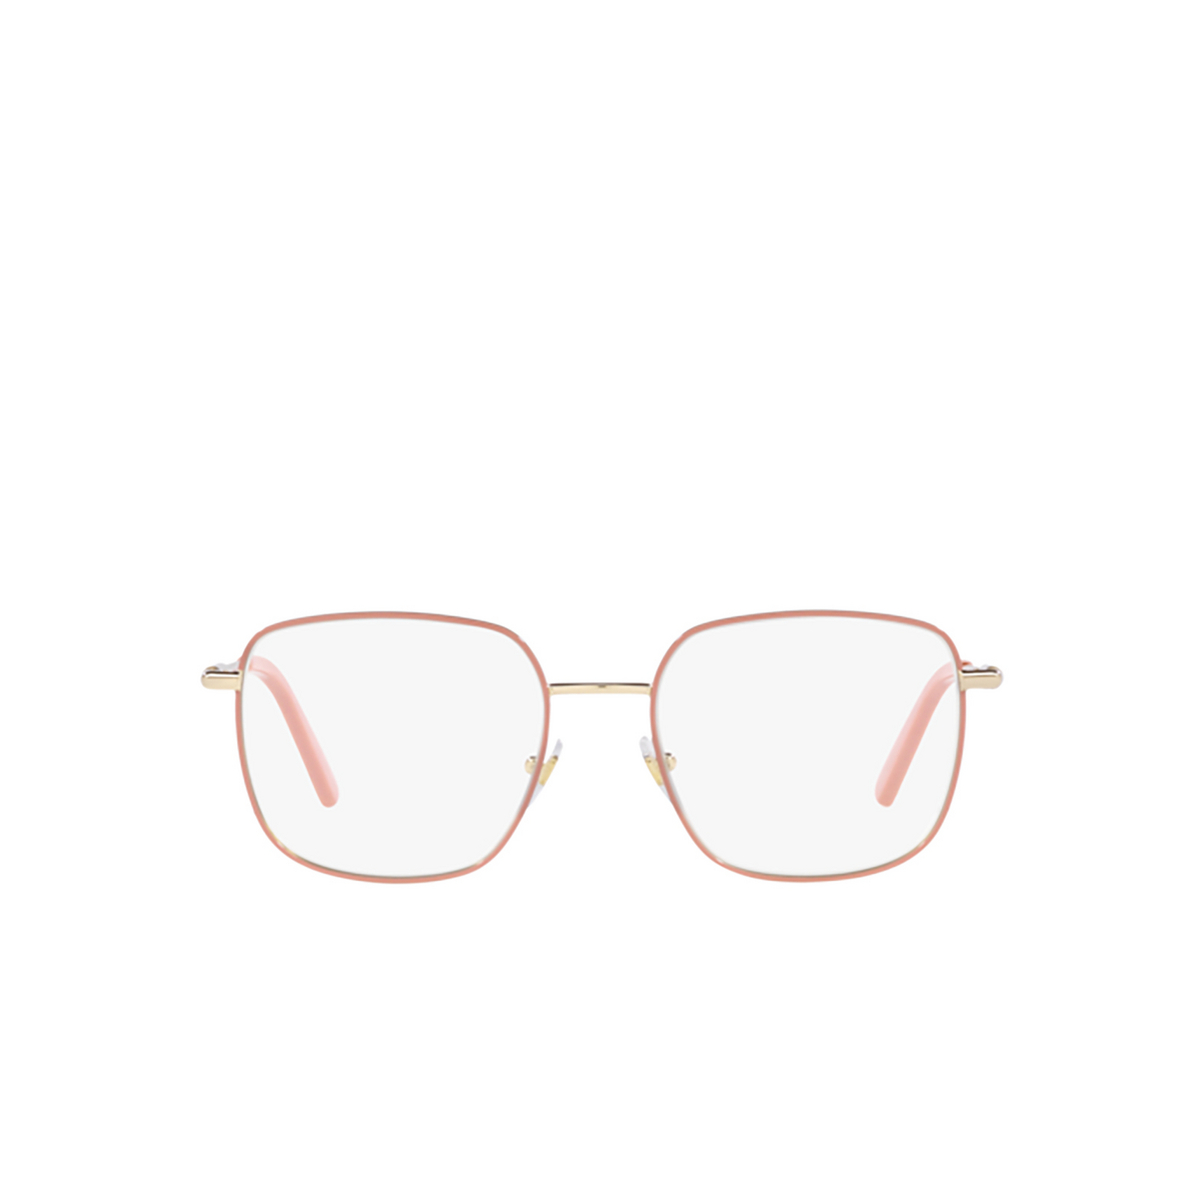 Versace VE1281 Eyeglasses 1469 Pale Gold / Pink - front view